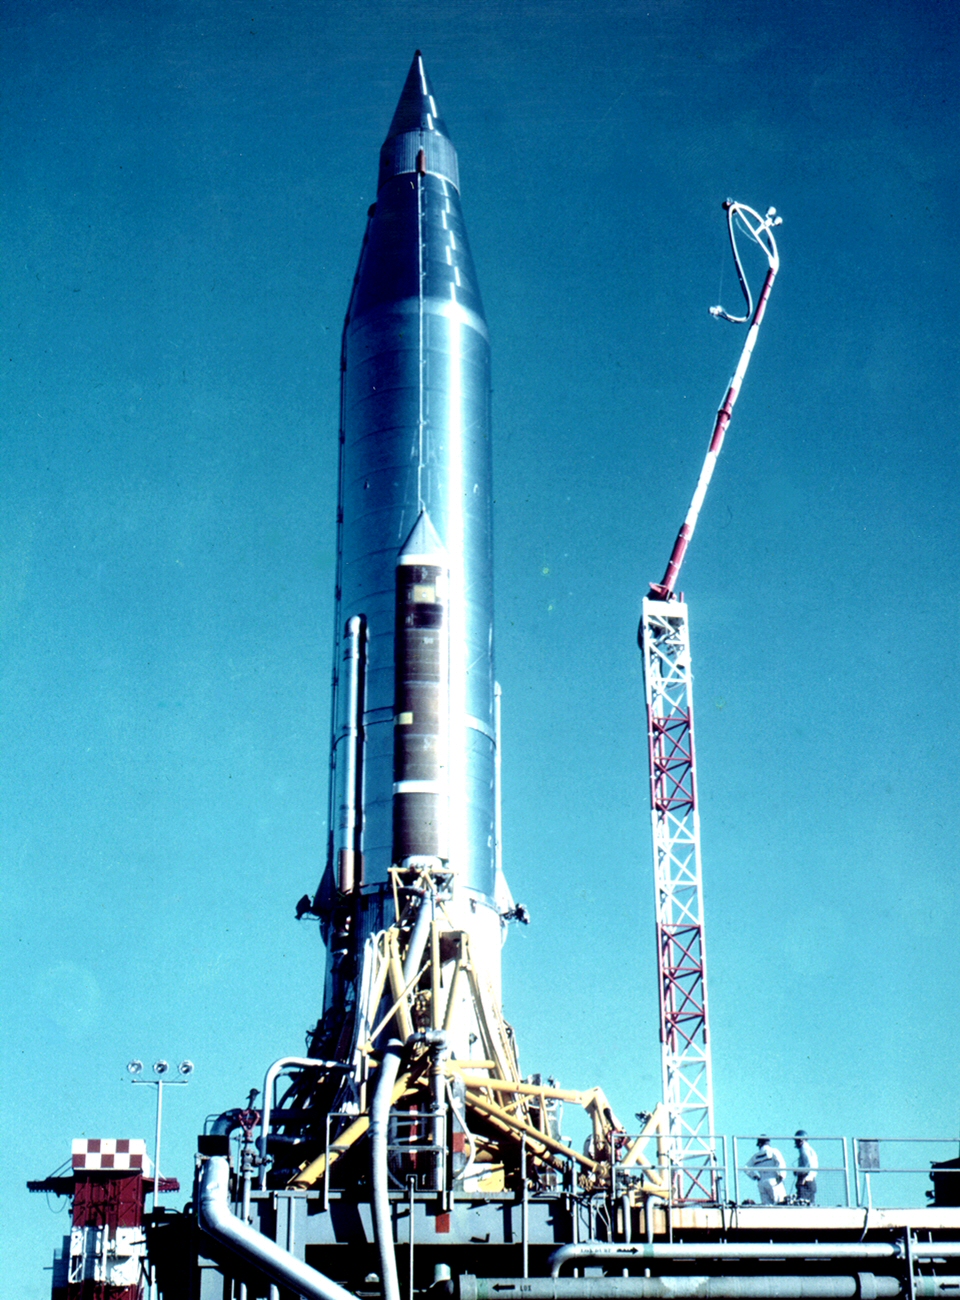 1958 World's first communication satellite launched